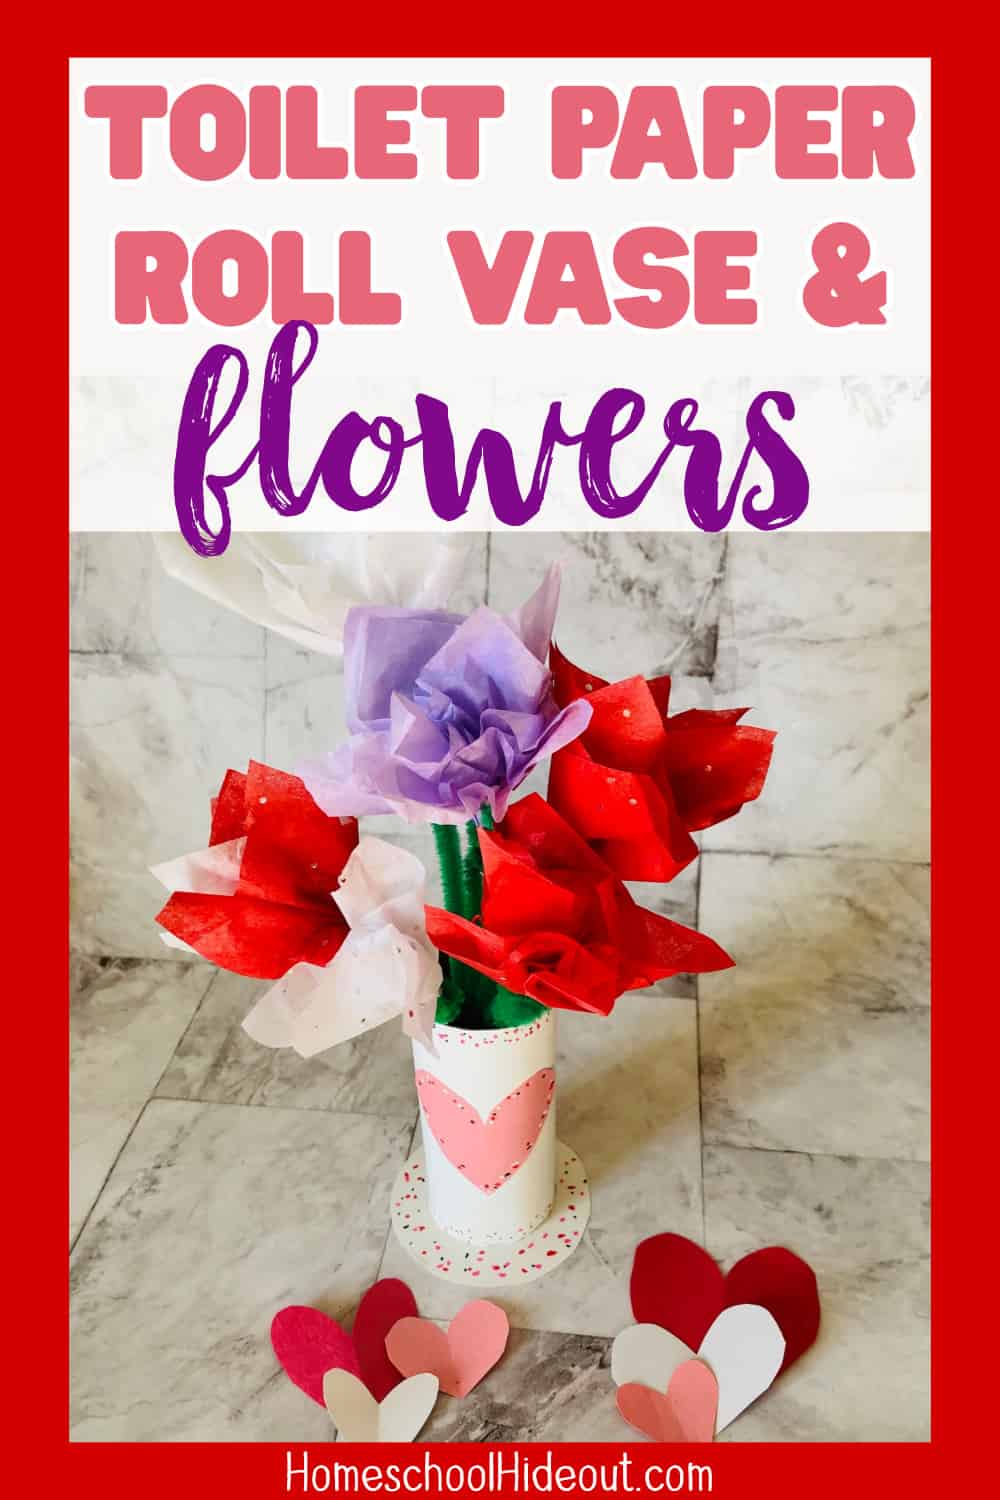 These Toilet Paper Roll Flowers & Vase are just what we need for Valentine's Day! We have all the supplies, the kids can make them and they're CUTE!